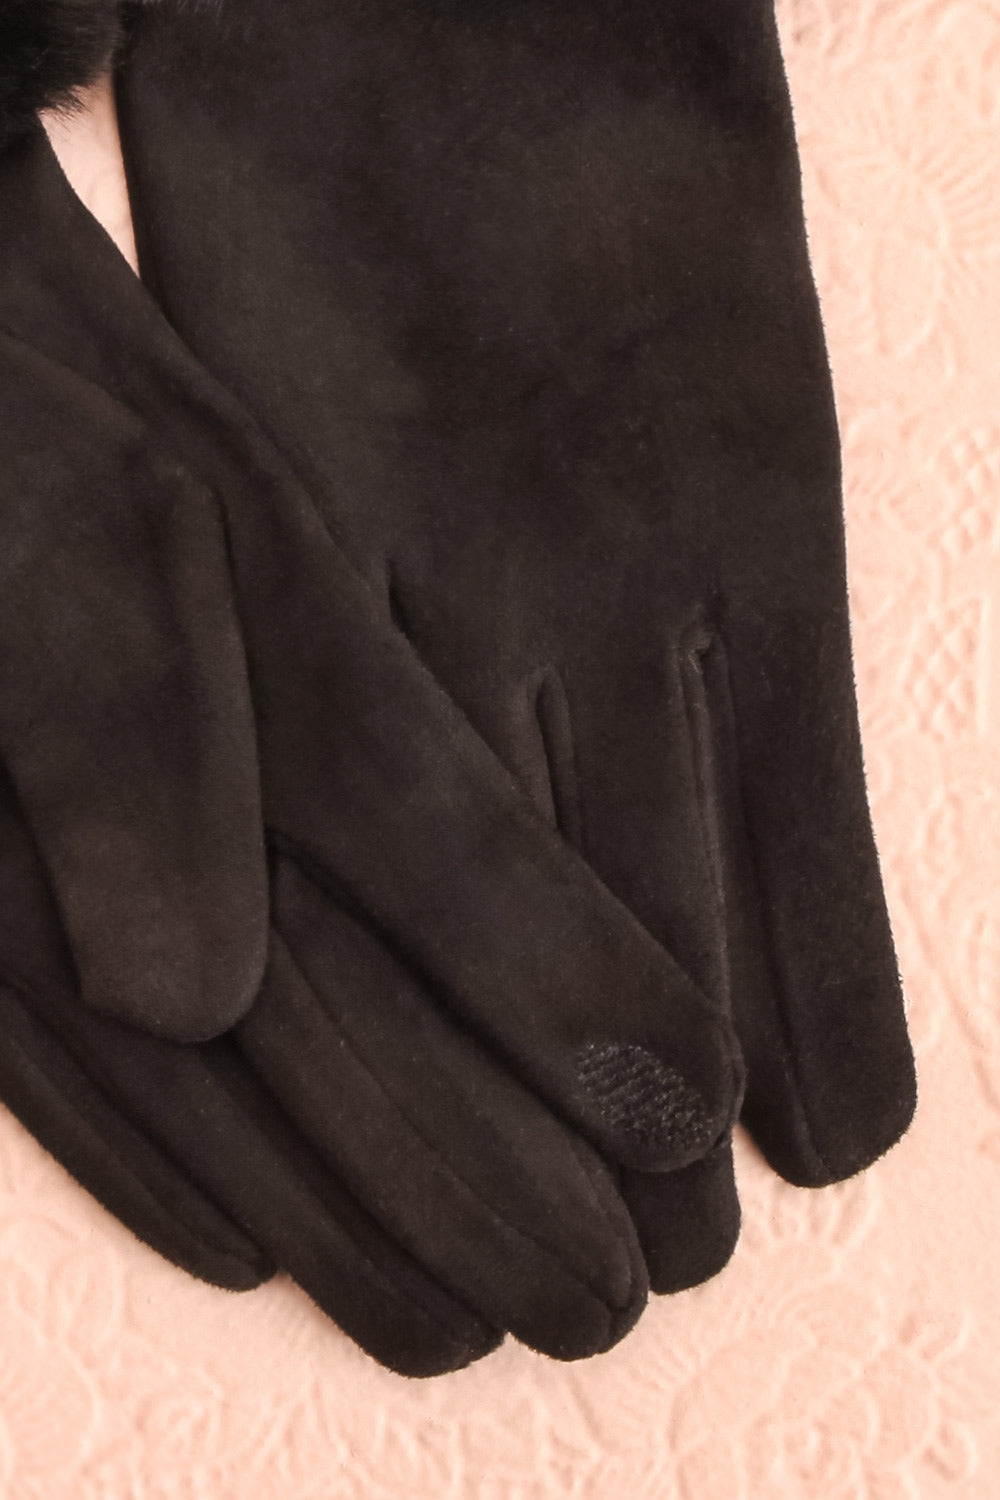 Derra Black Gloves with Faux-Fur Lining & Cuff finger close-up | Boutique 1861